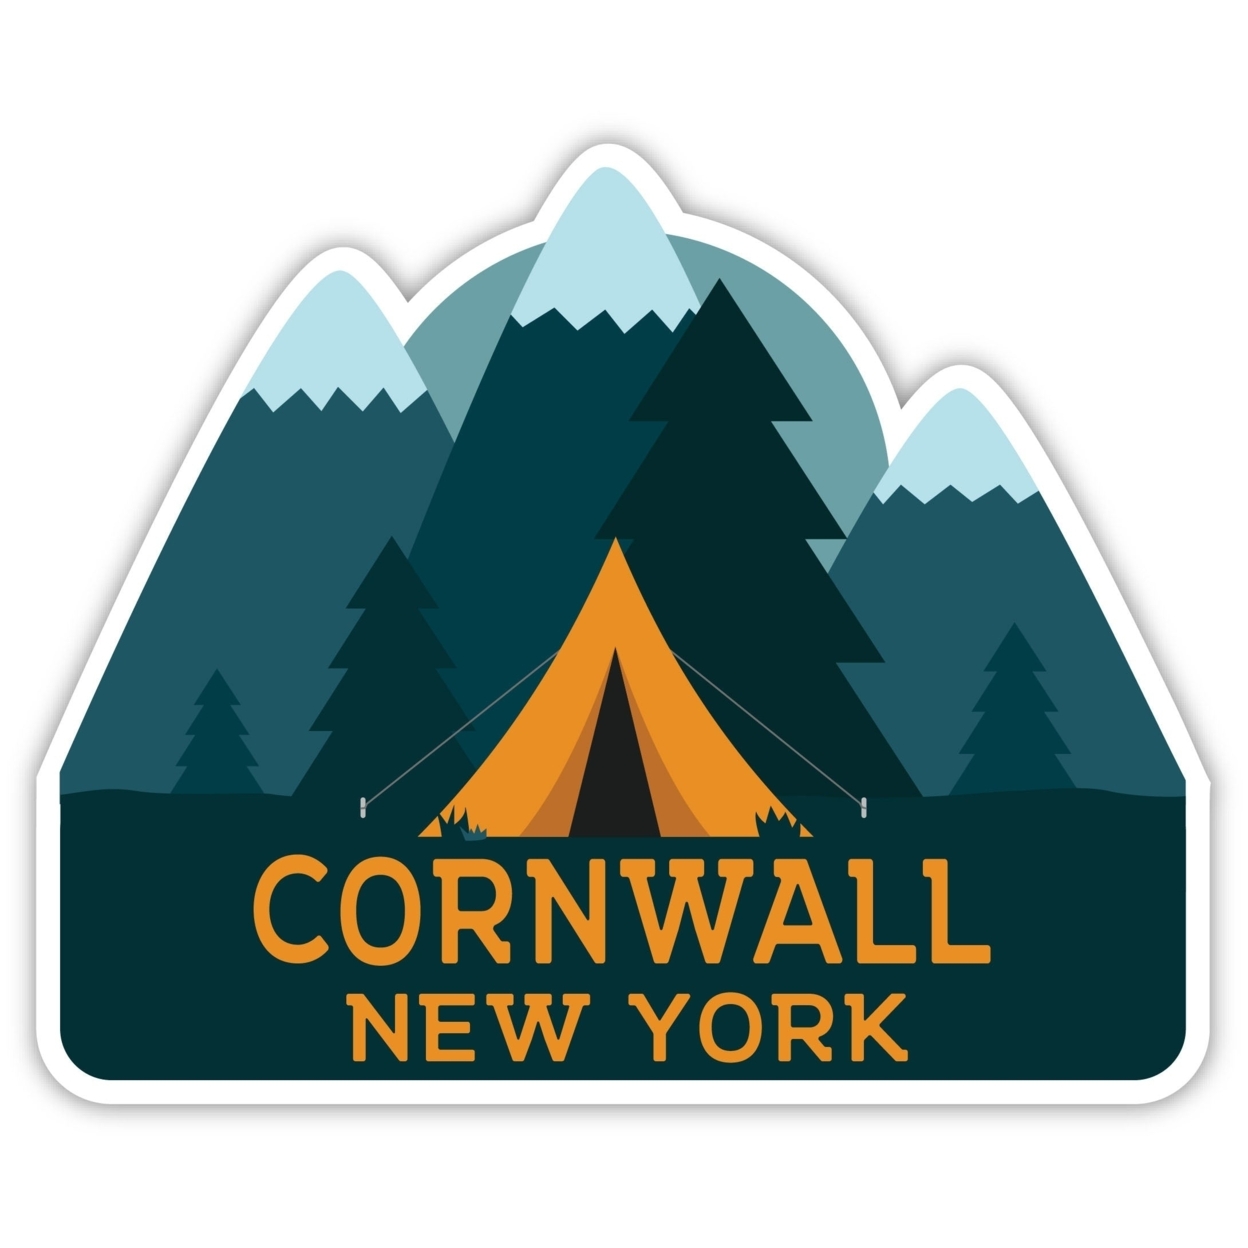 Cornwall New York Souvenir Decorative Stickers (Choose Theme And Size) - Single Unit, 8-Inch, Tent